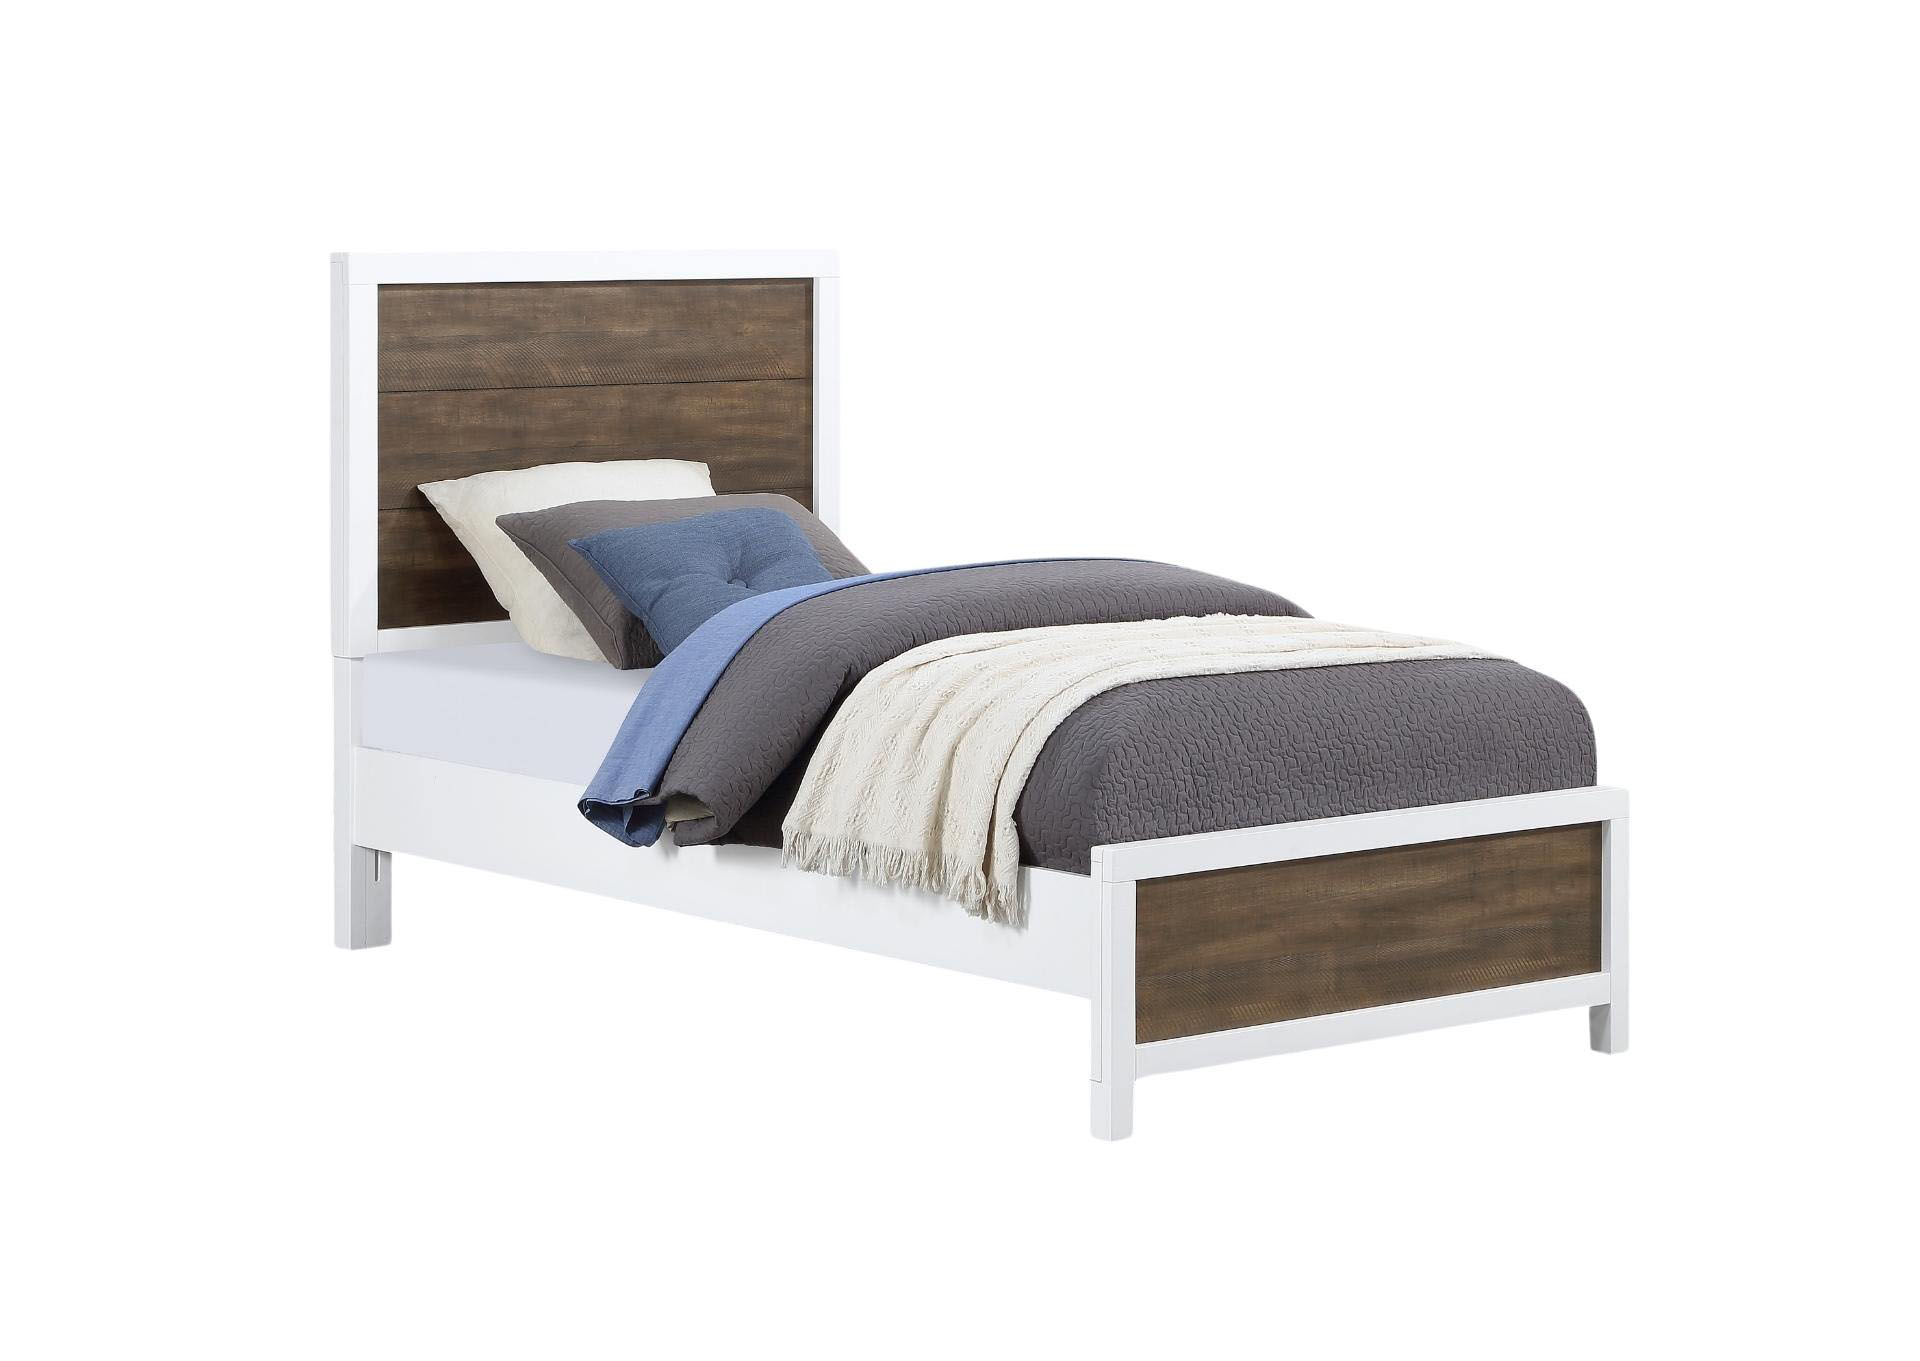 DAUGHTREY WHITE TWIN PANEL BED,AUSTIN GROUP